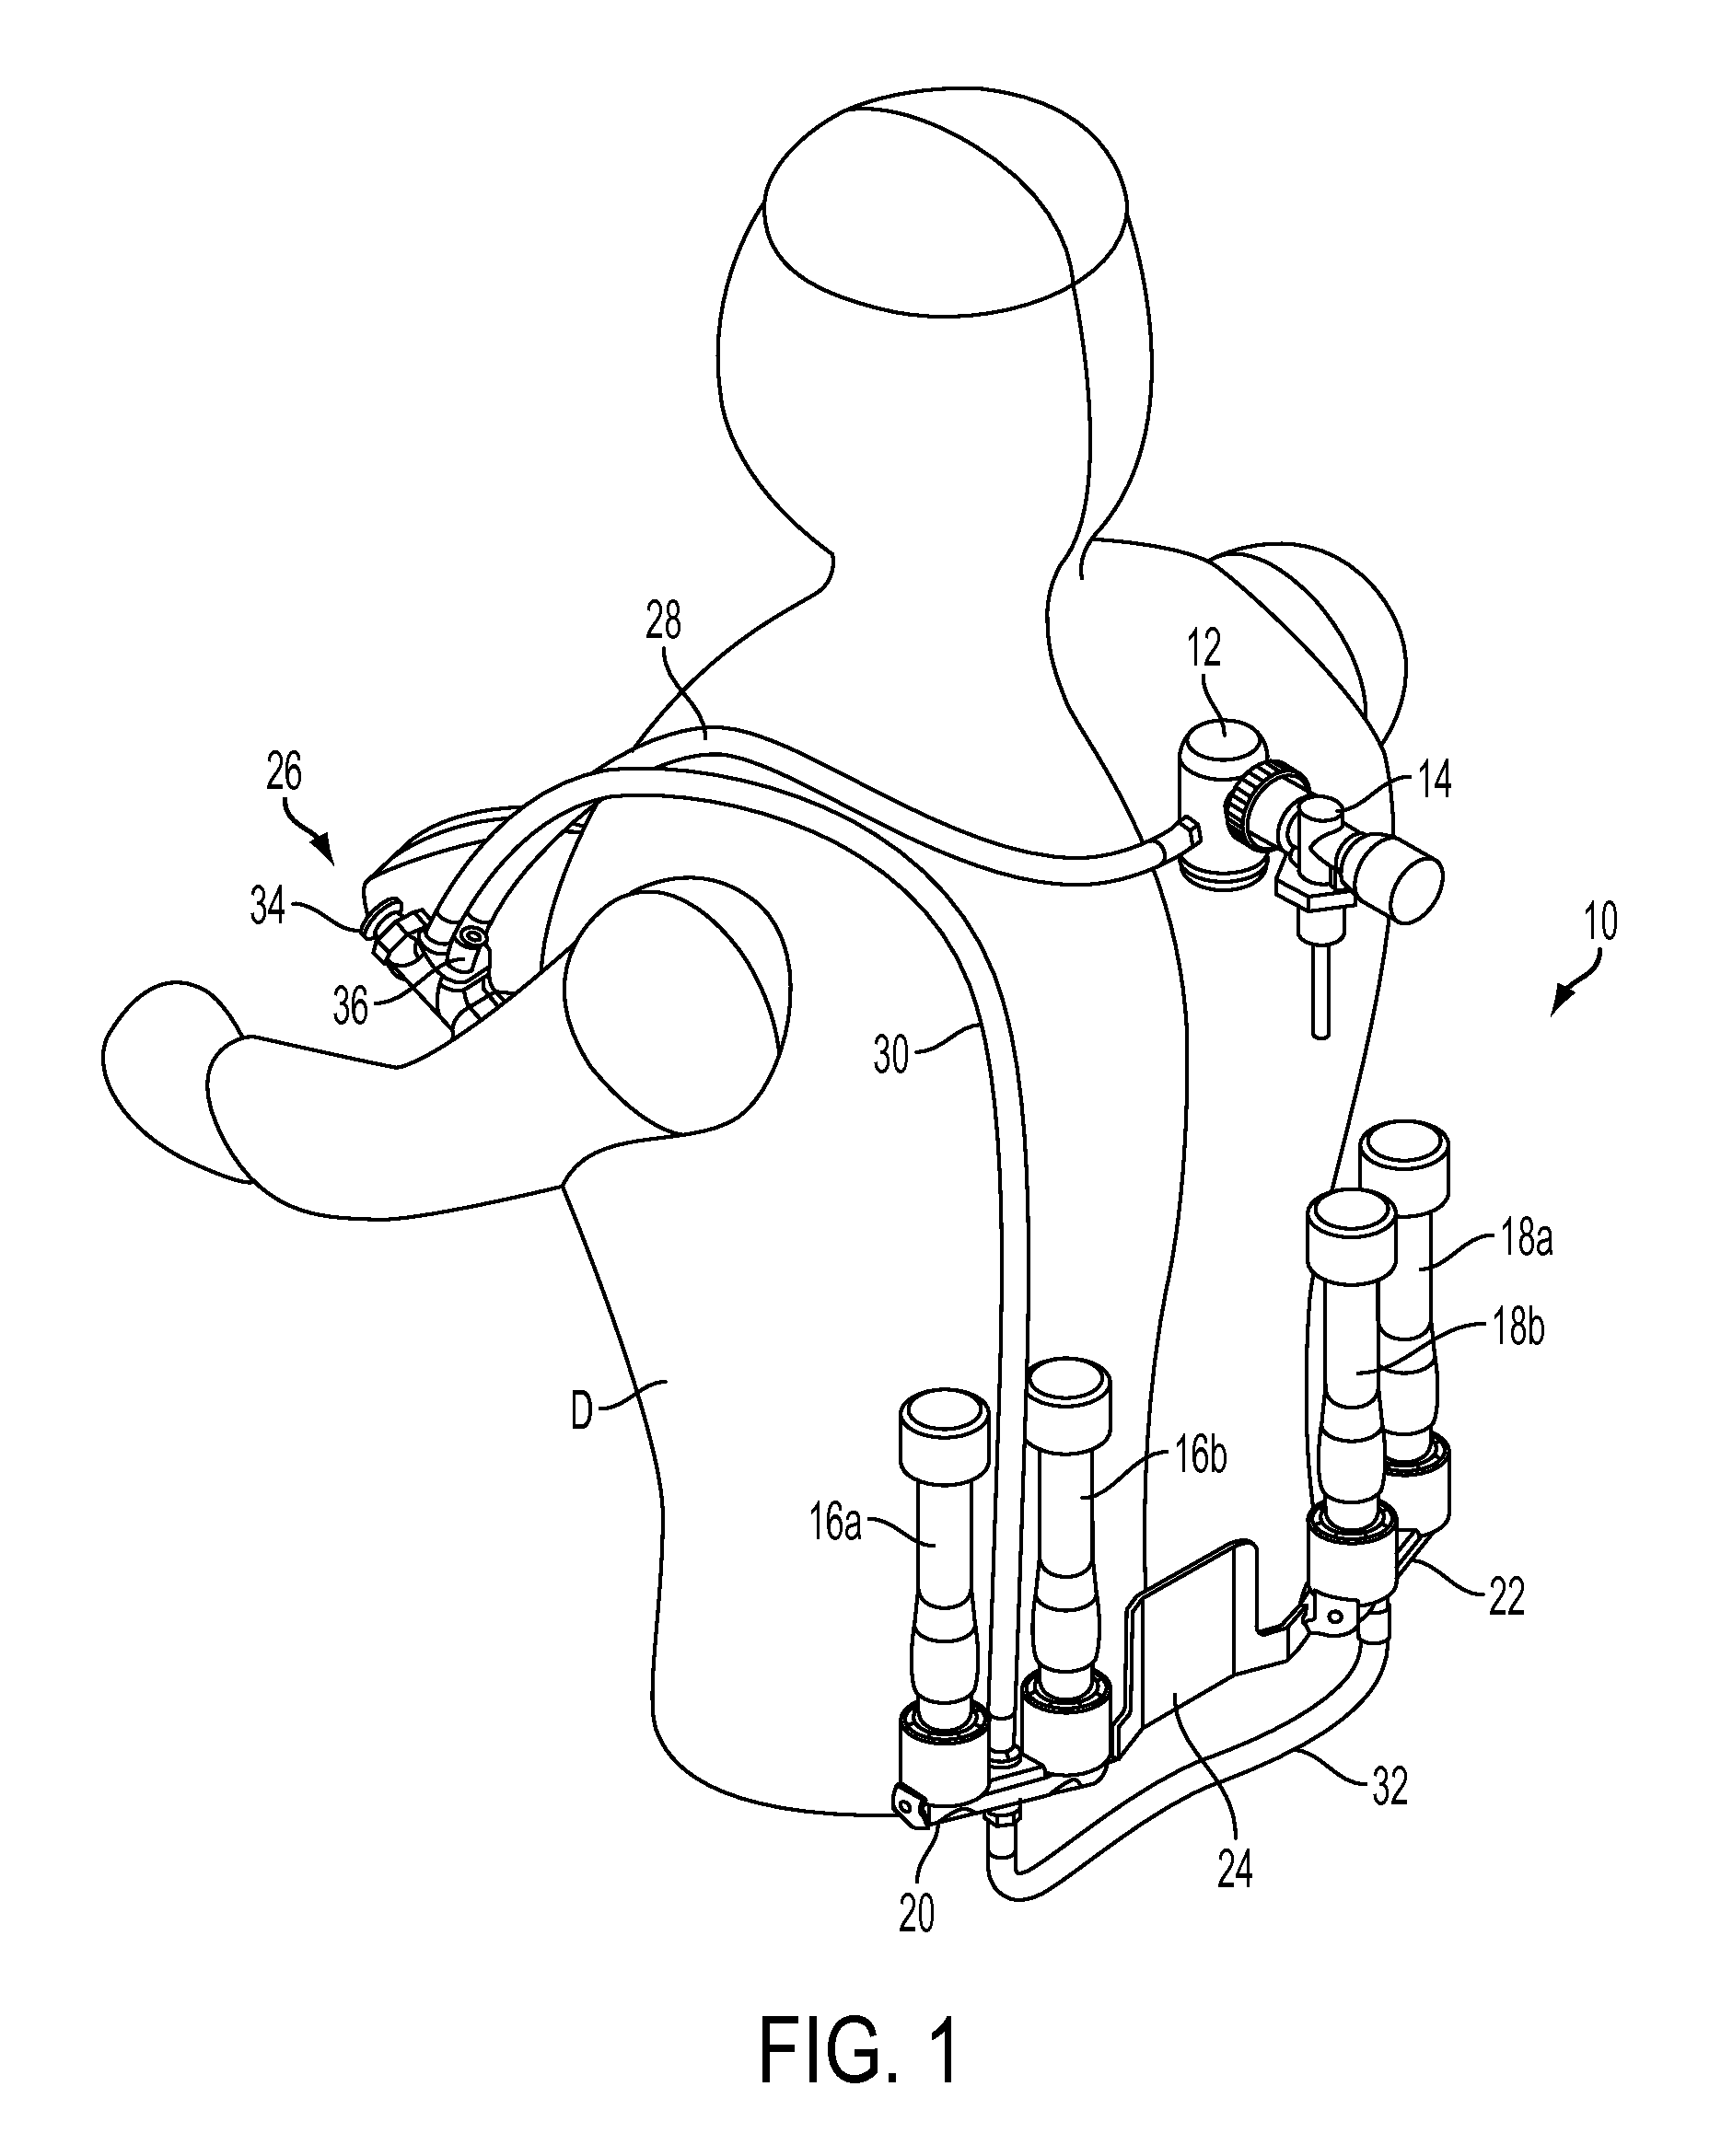 Method of and apparatus for bouyancy compensation for divers